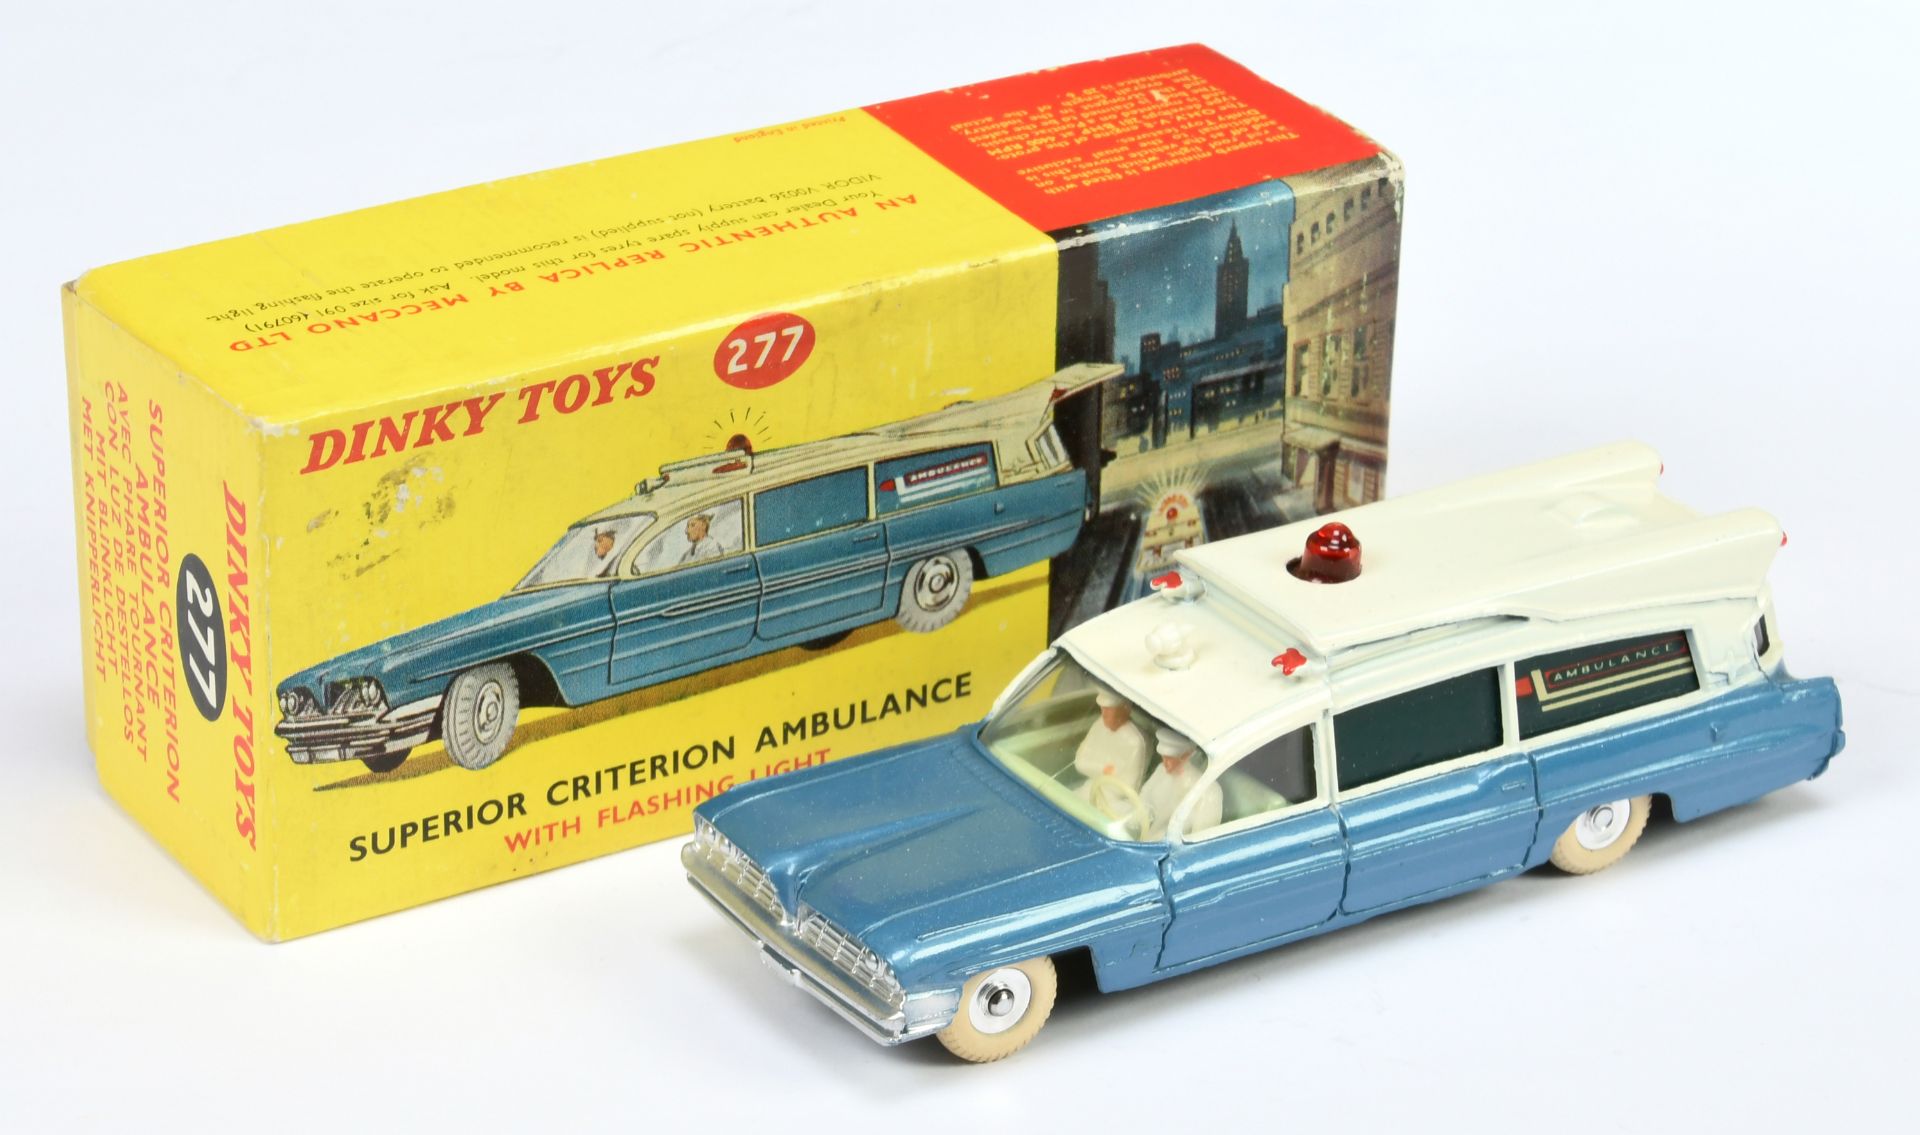 Dinky Toys 277 Superior Criterion "Ambulance" Two-Tone Metallic blue and off white, pale green in...